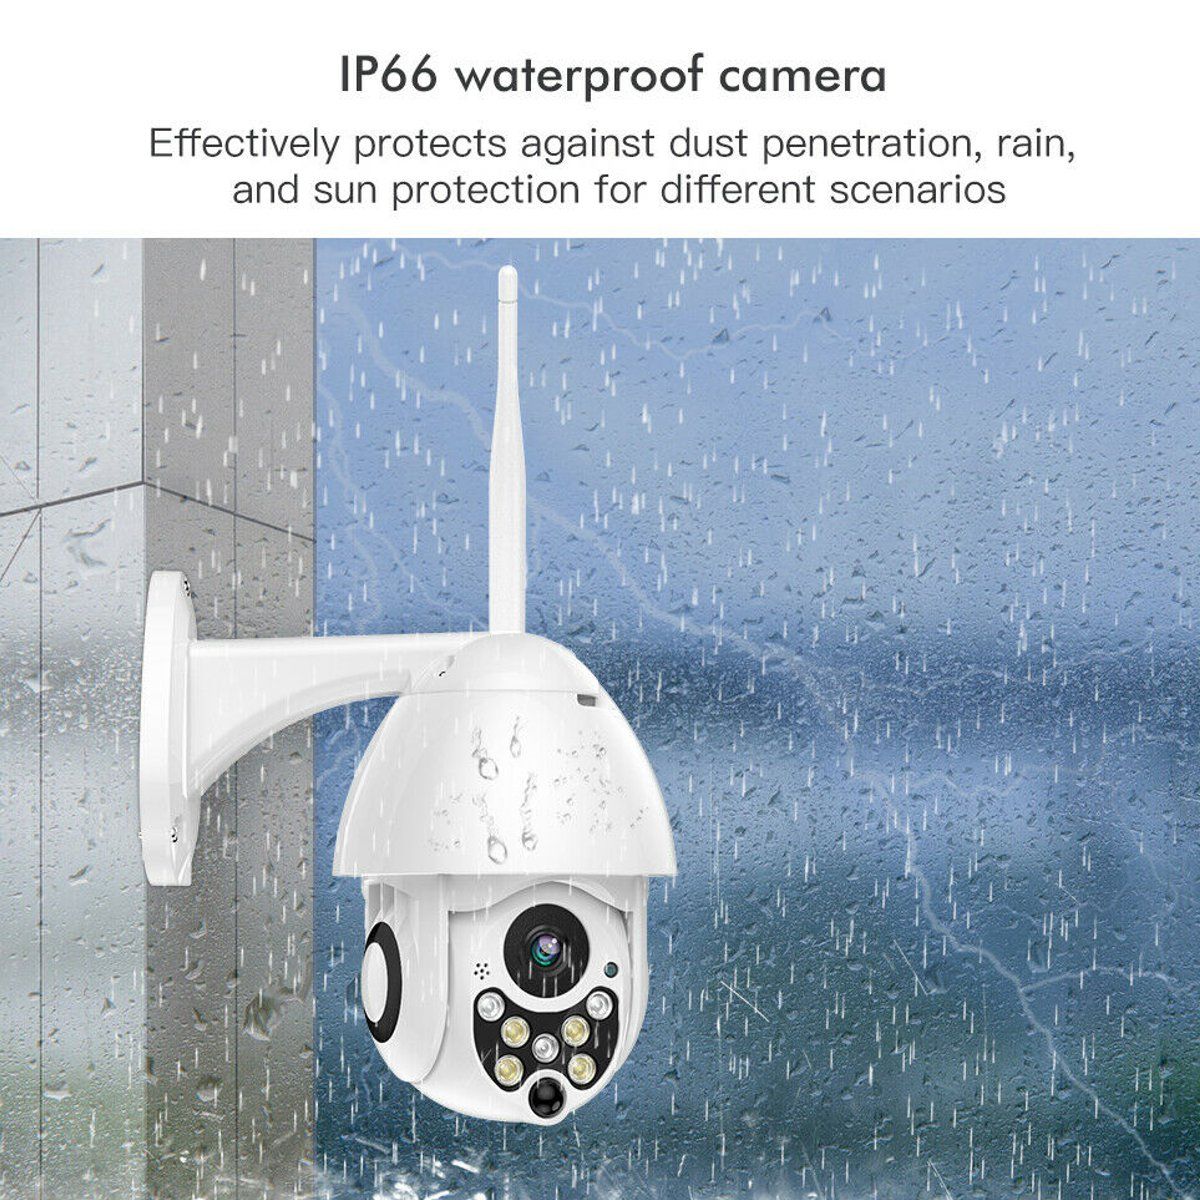 5X-Zoom-Pan-Tilt-2MP-HD-WiFi-IP-Security-Camera-7-LEDs-Infrared-Night-Vision-Outdoor-Waterproof-1546261